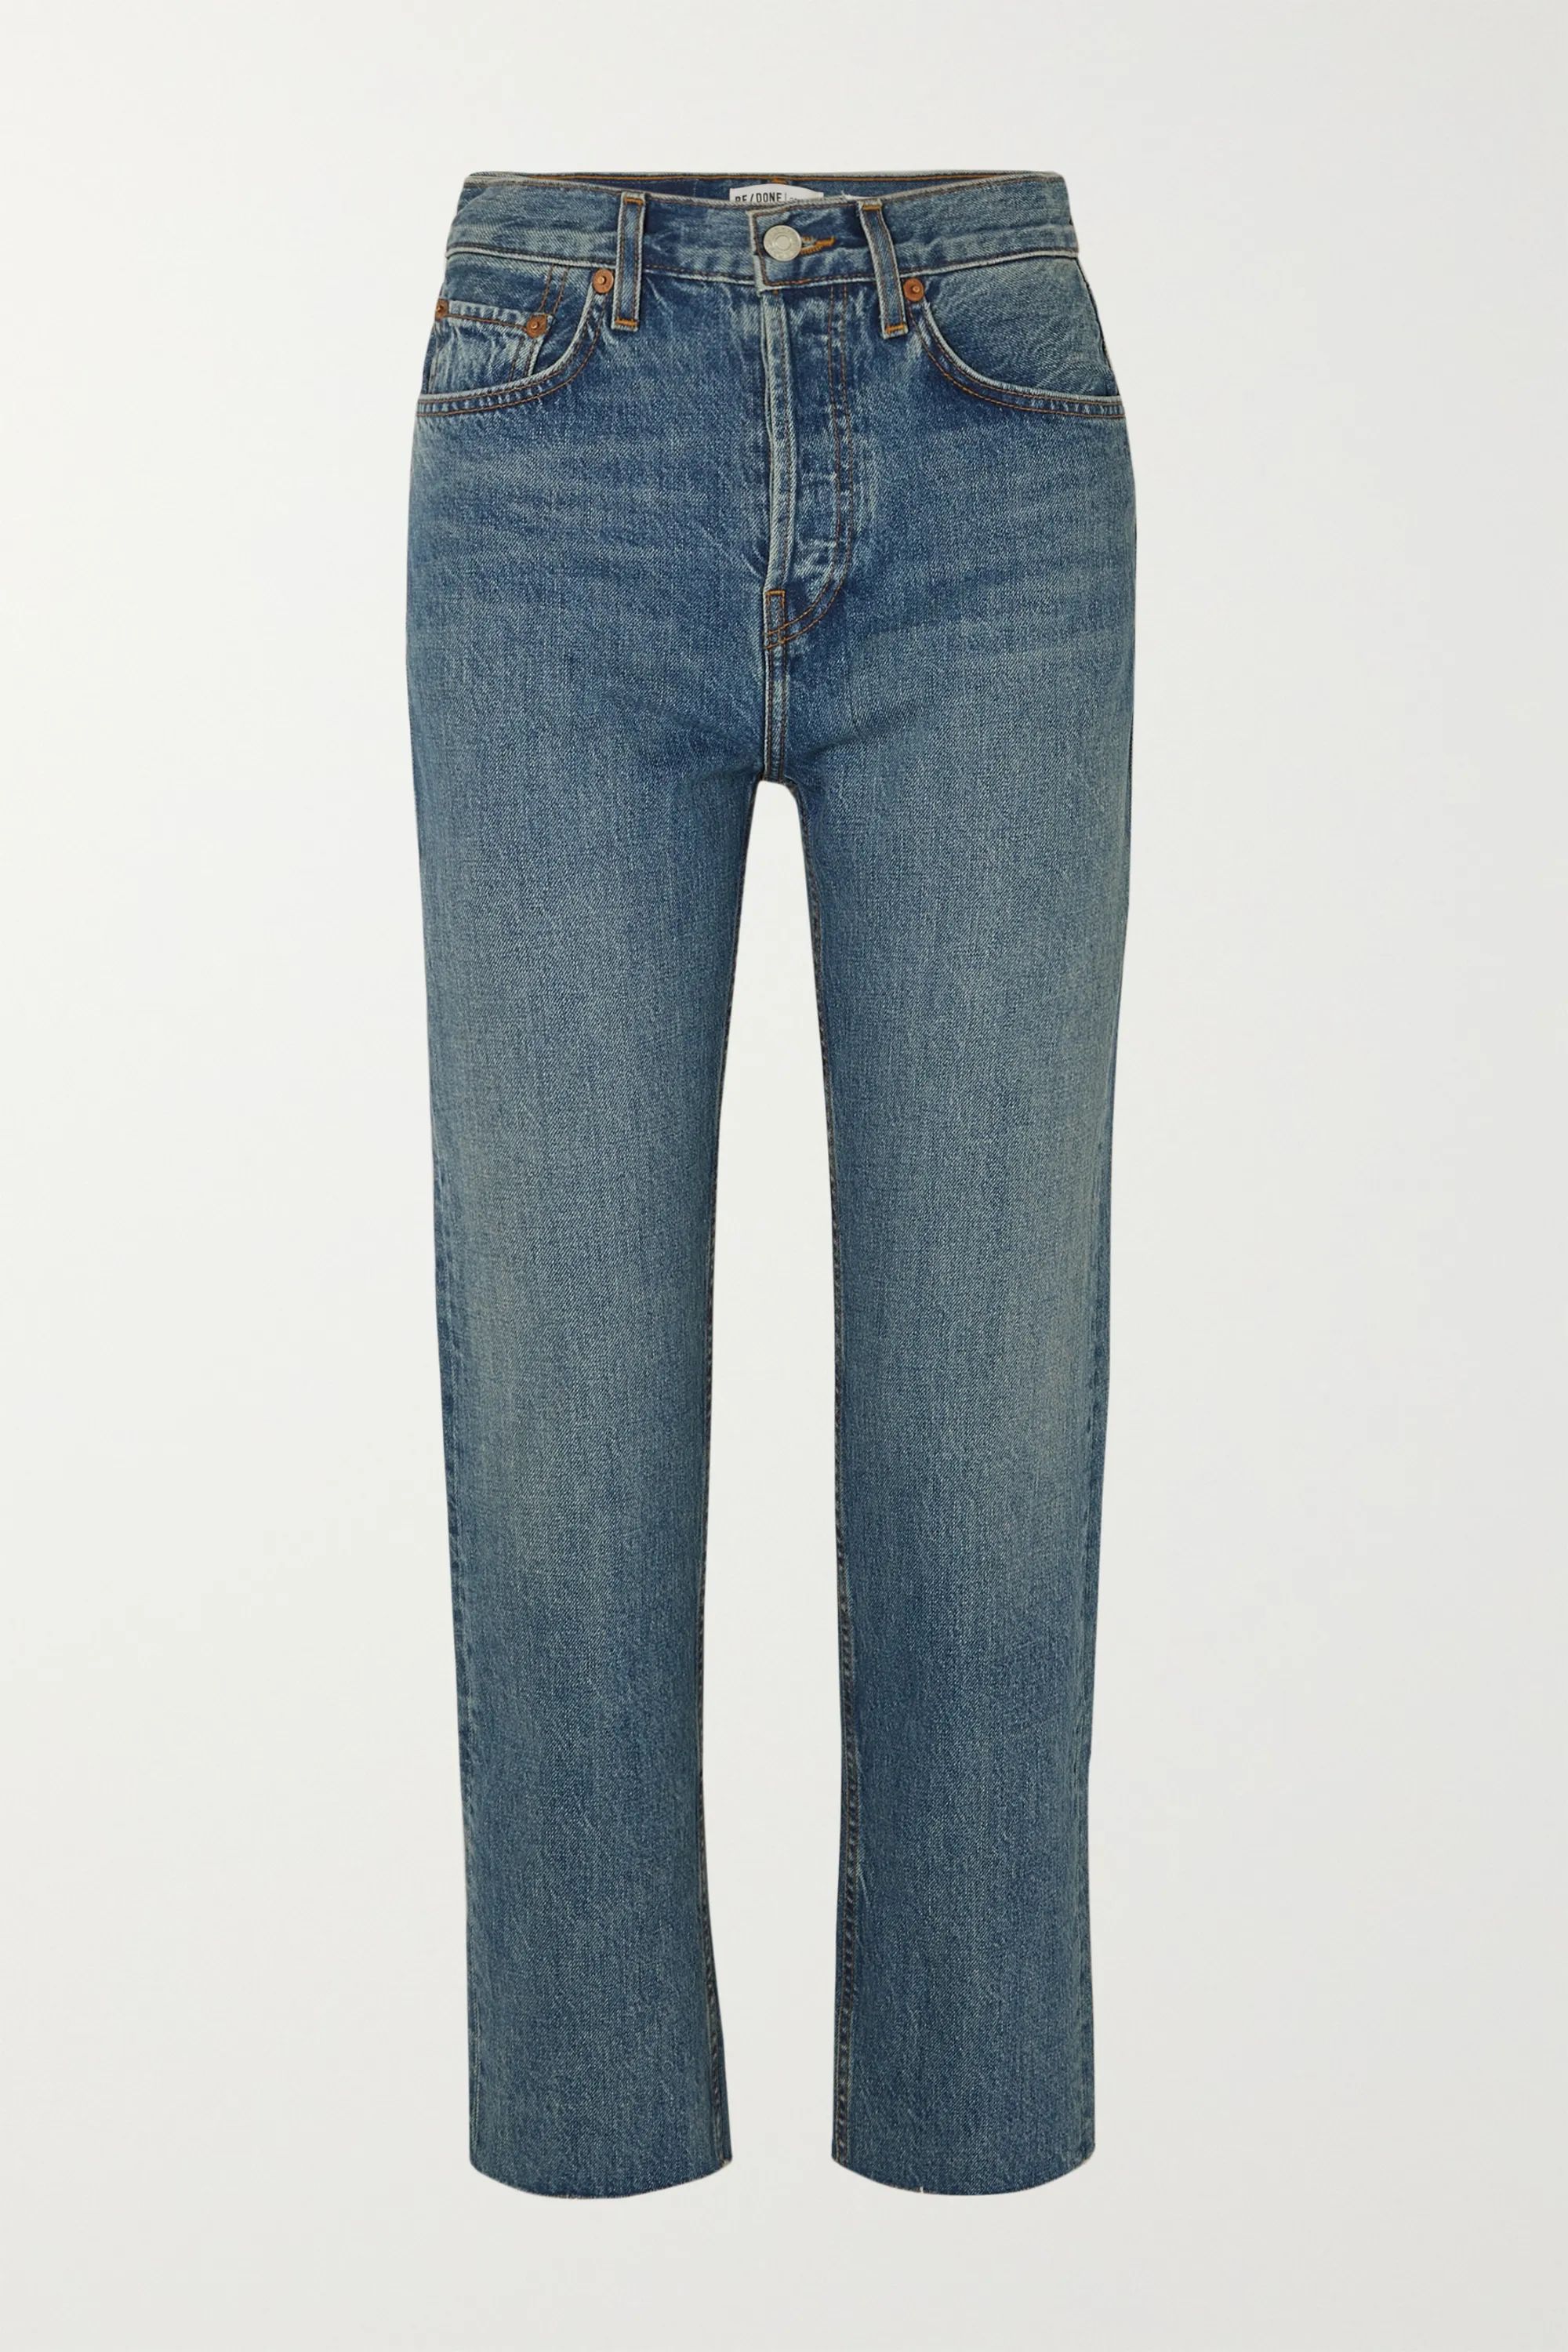 Originals Stove Pipe high-rise straight-leg jeans | NET-A-PORTER (US)